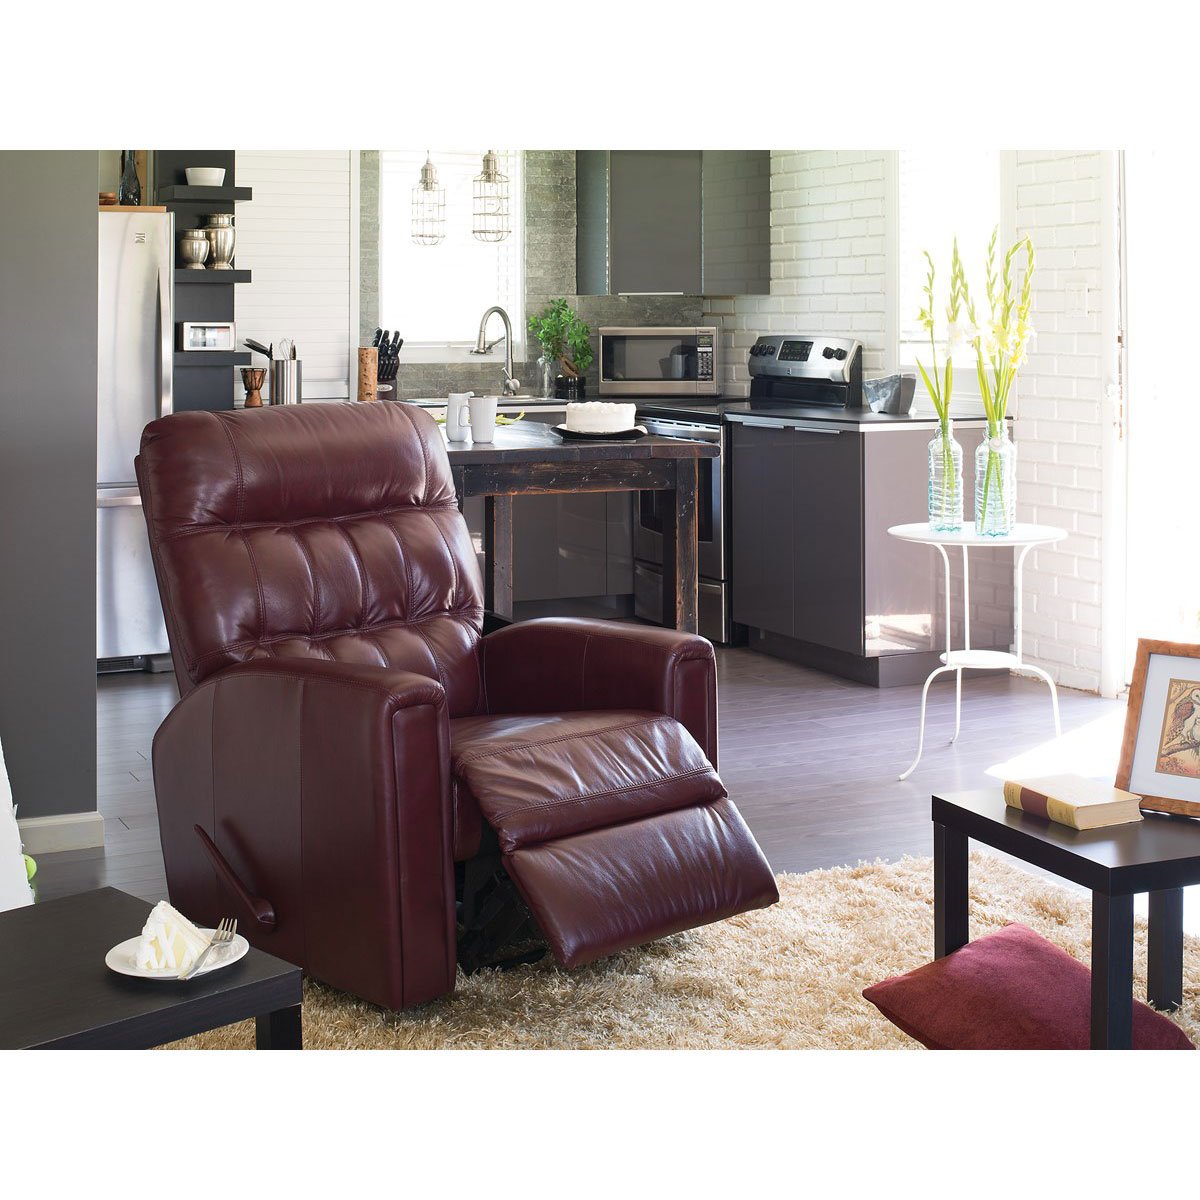 Reclinable Thorncliffe Tulsa Tobacco Lea/mth